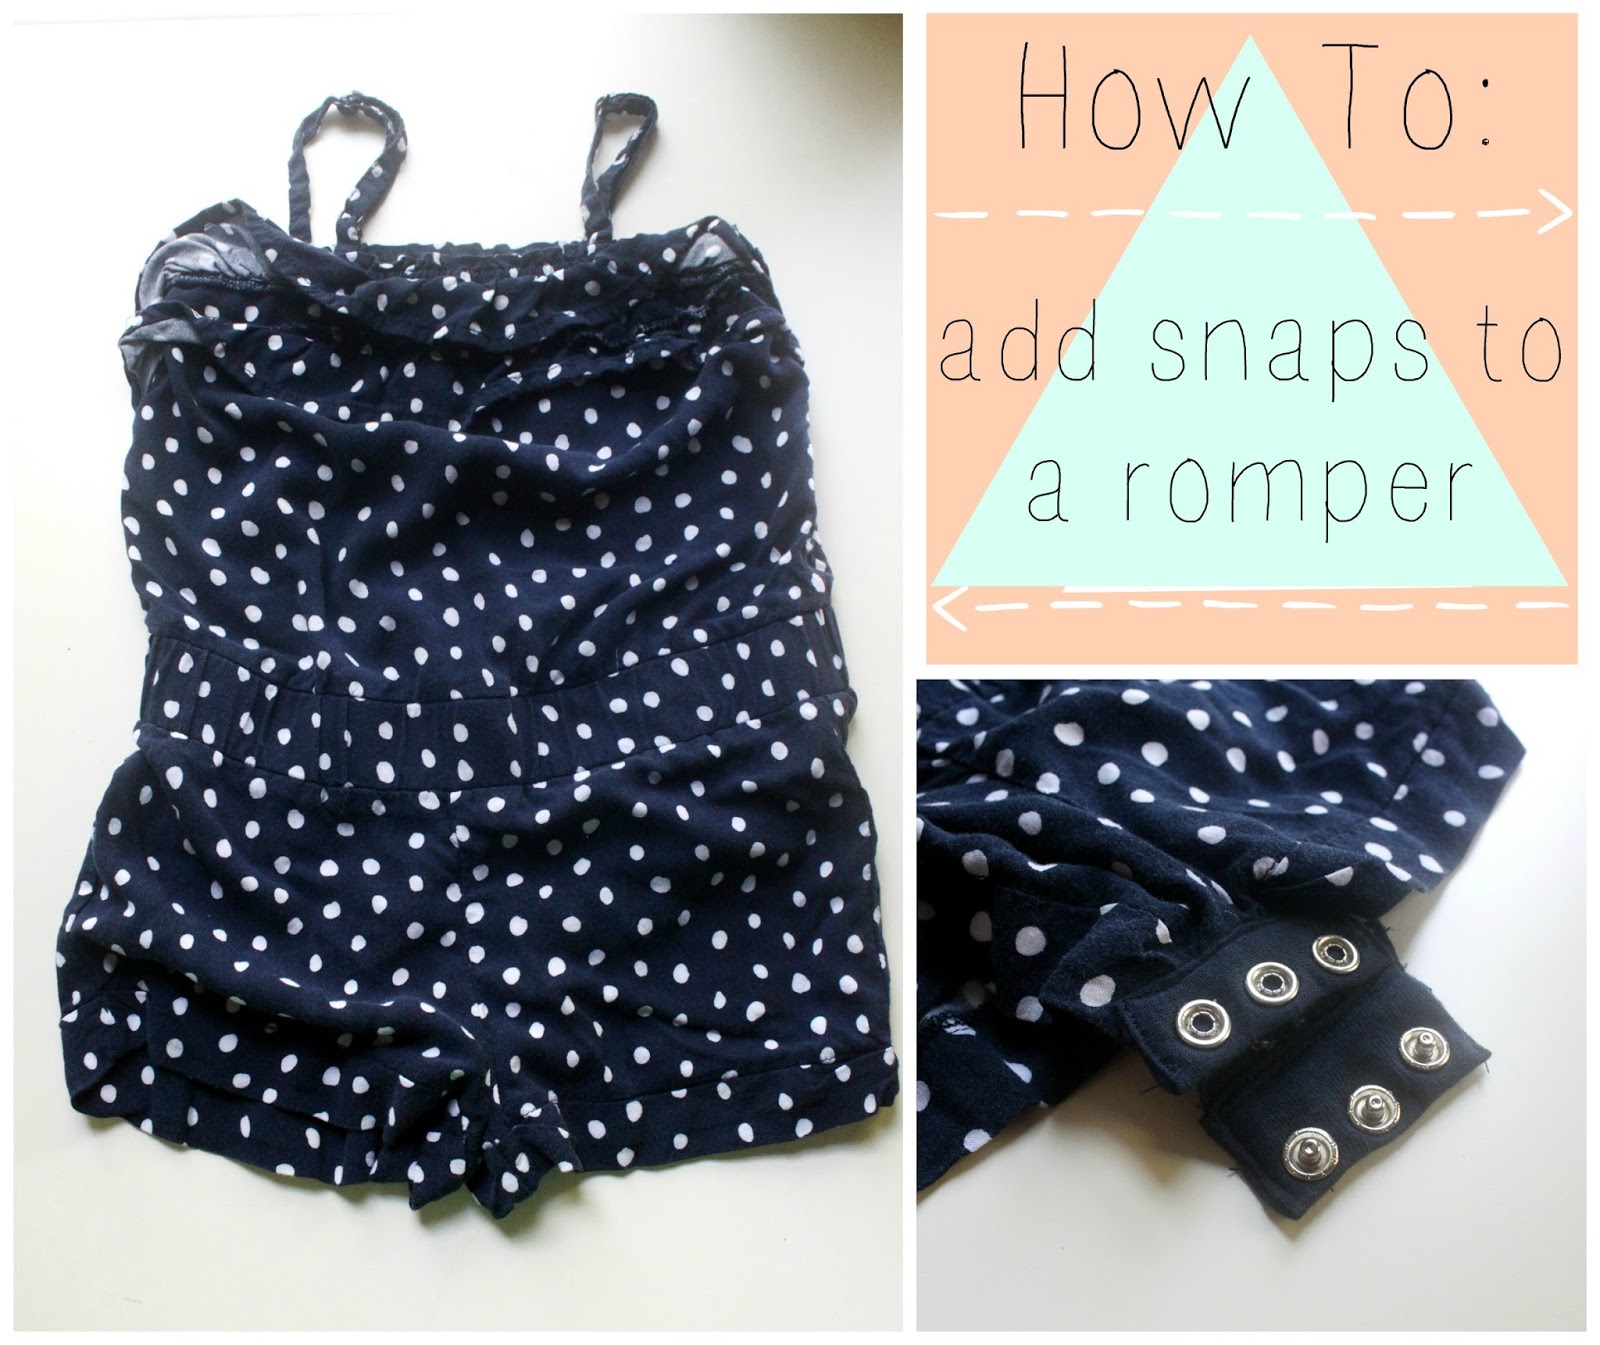 SEWING FOR BEGINNERS: How To Put On Snaps 